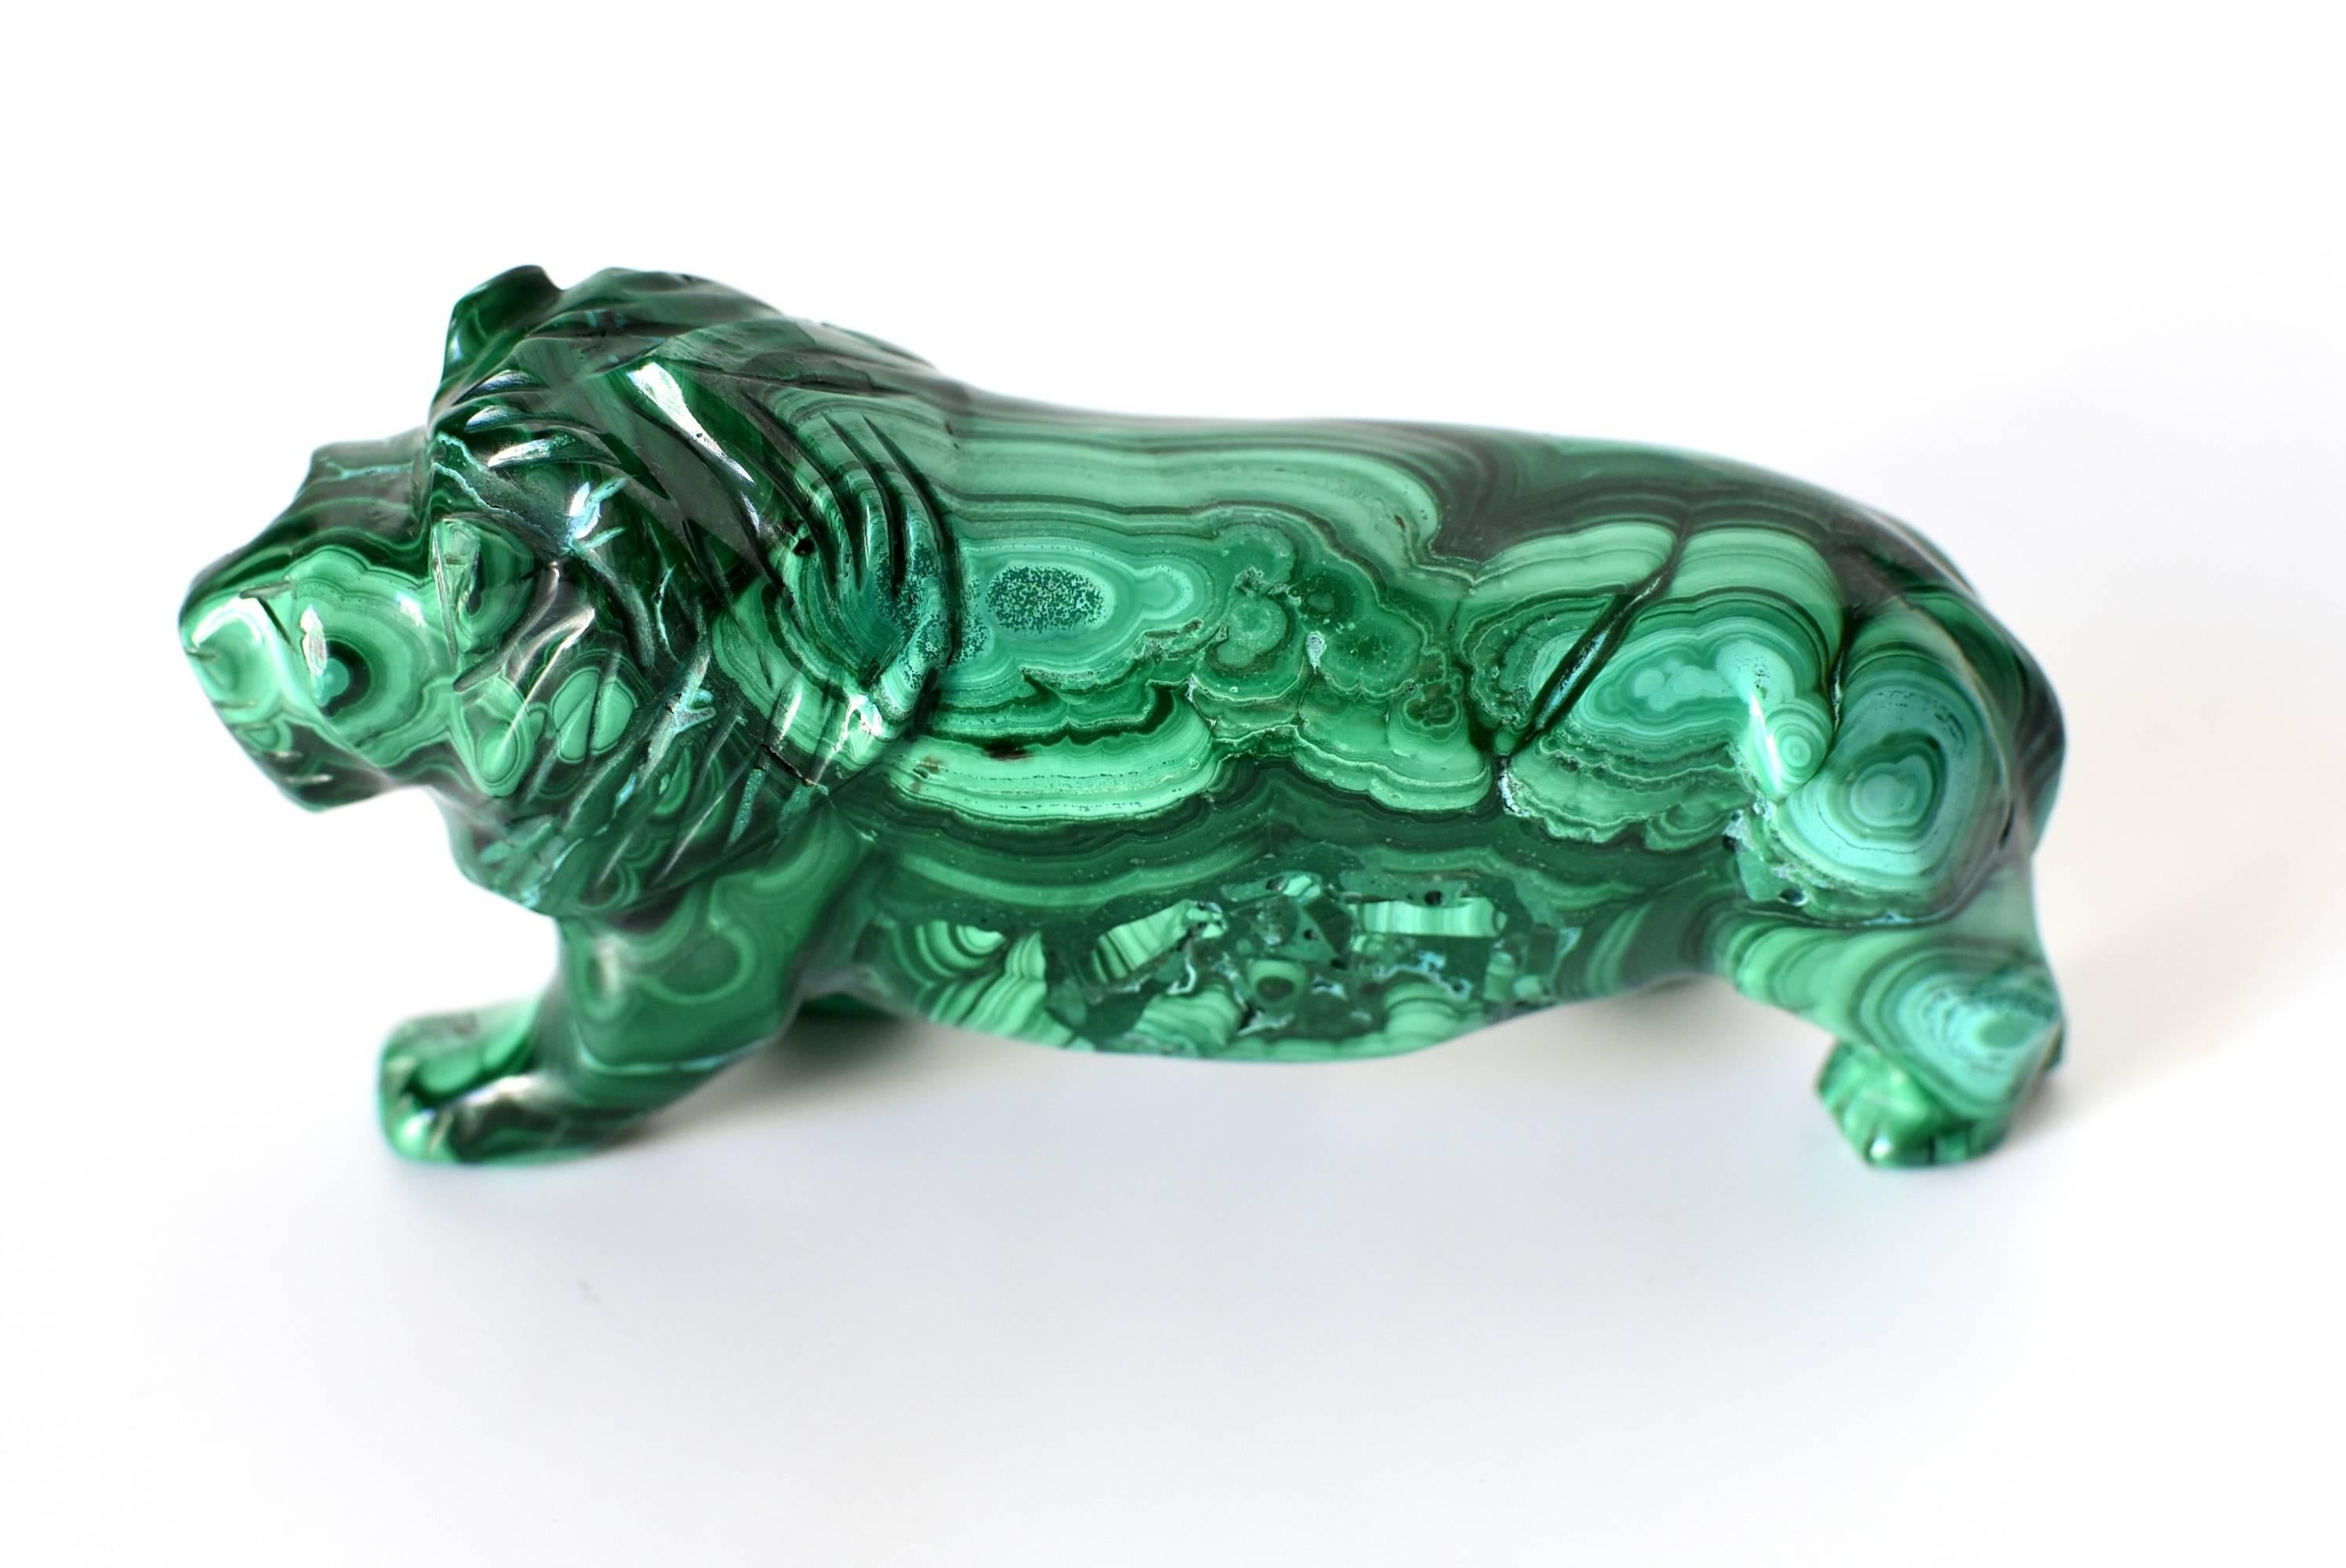 A wonderful 1.4 lb lion sculpture in the most spectacular natural malachite. The lion is depicted in walking motion. All natural with splendid swirls and patterns, this remarkable pieces is a beautiful piece to add to your collection. Also fantastic